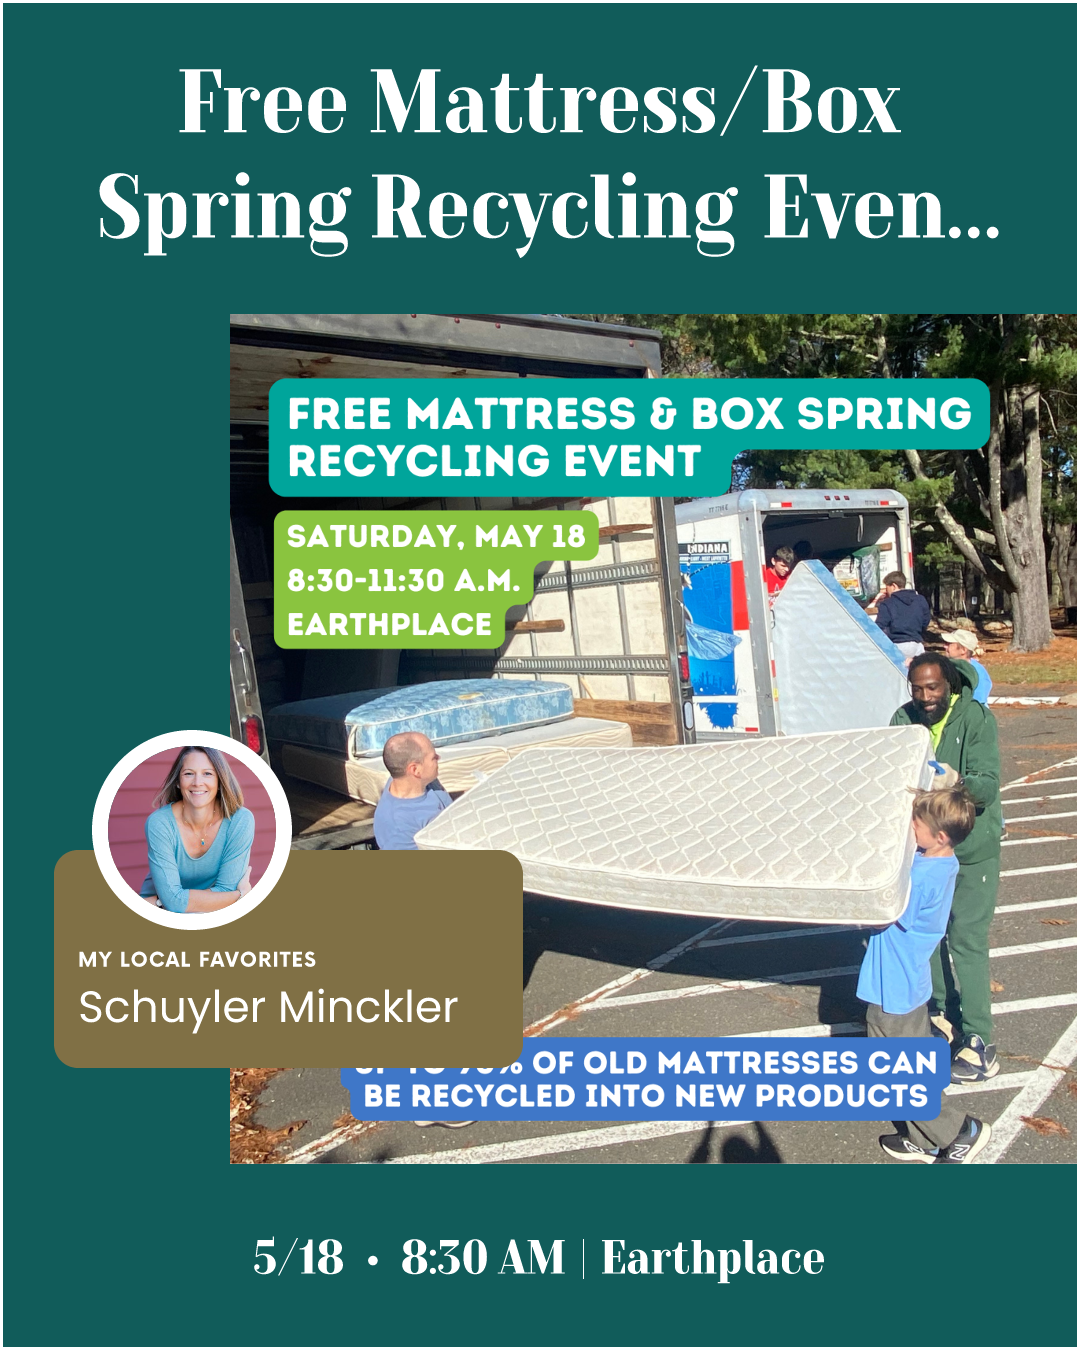 Free Mattress/Box Spring Recycling Event on Saturday, May 18